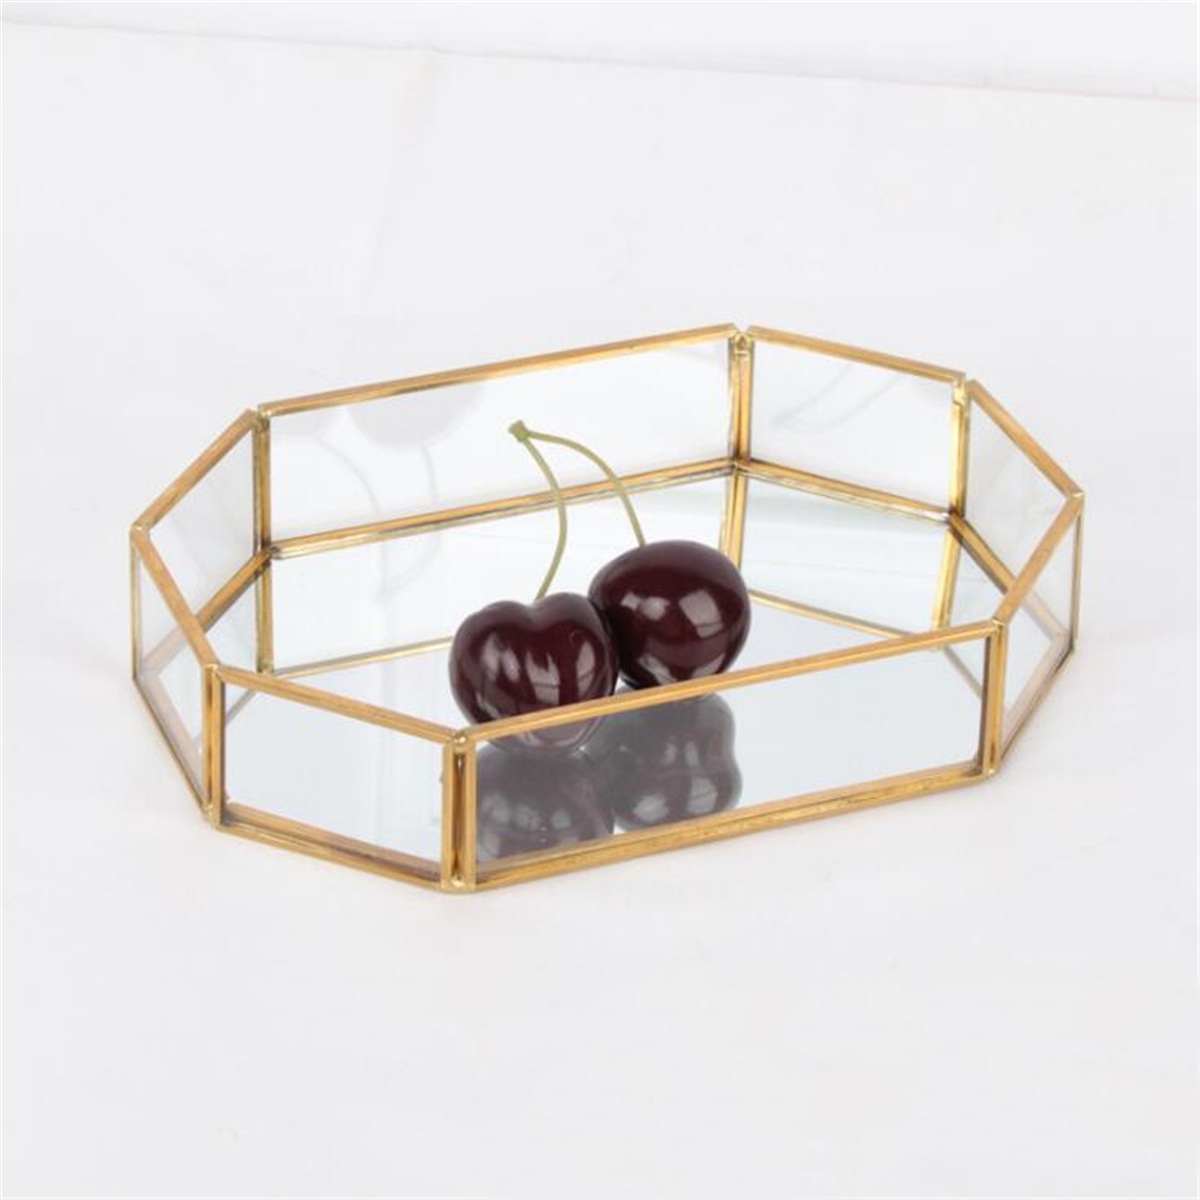 2-Size-Mirror-Glass-Tray-Octagon-Cosmetic-Makeup-Desktop-Organizer-Jewelry-Display-Stand-Holder-1382768-4